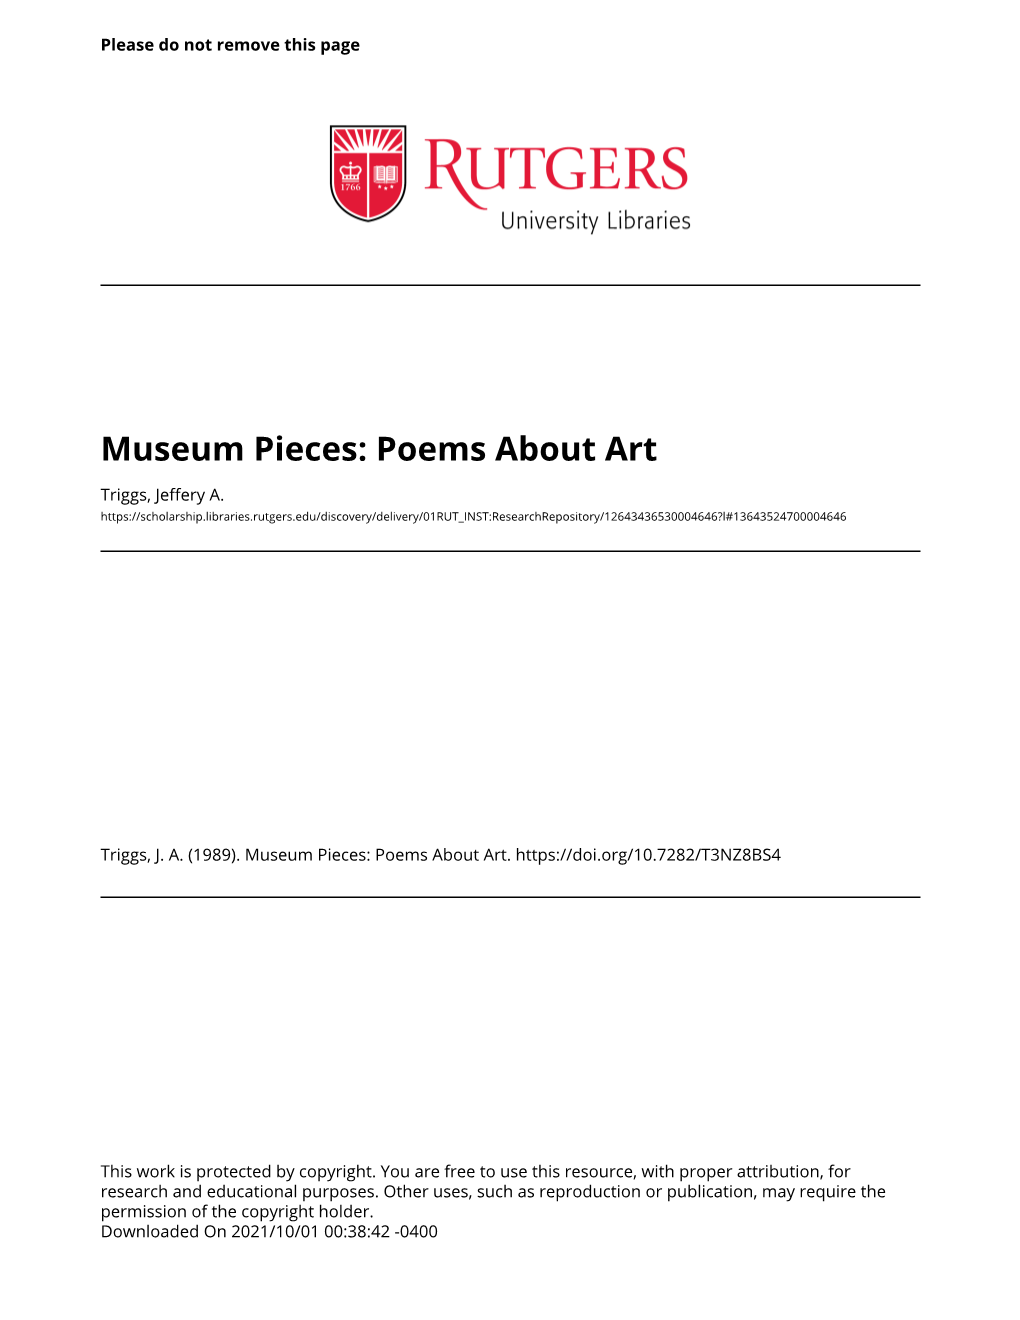 Museum Pieces: Poems About Art